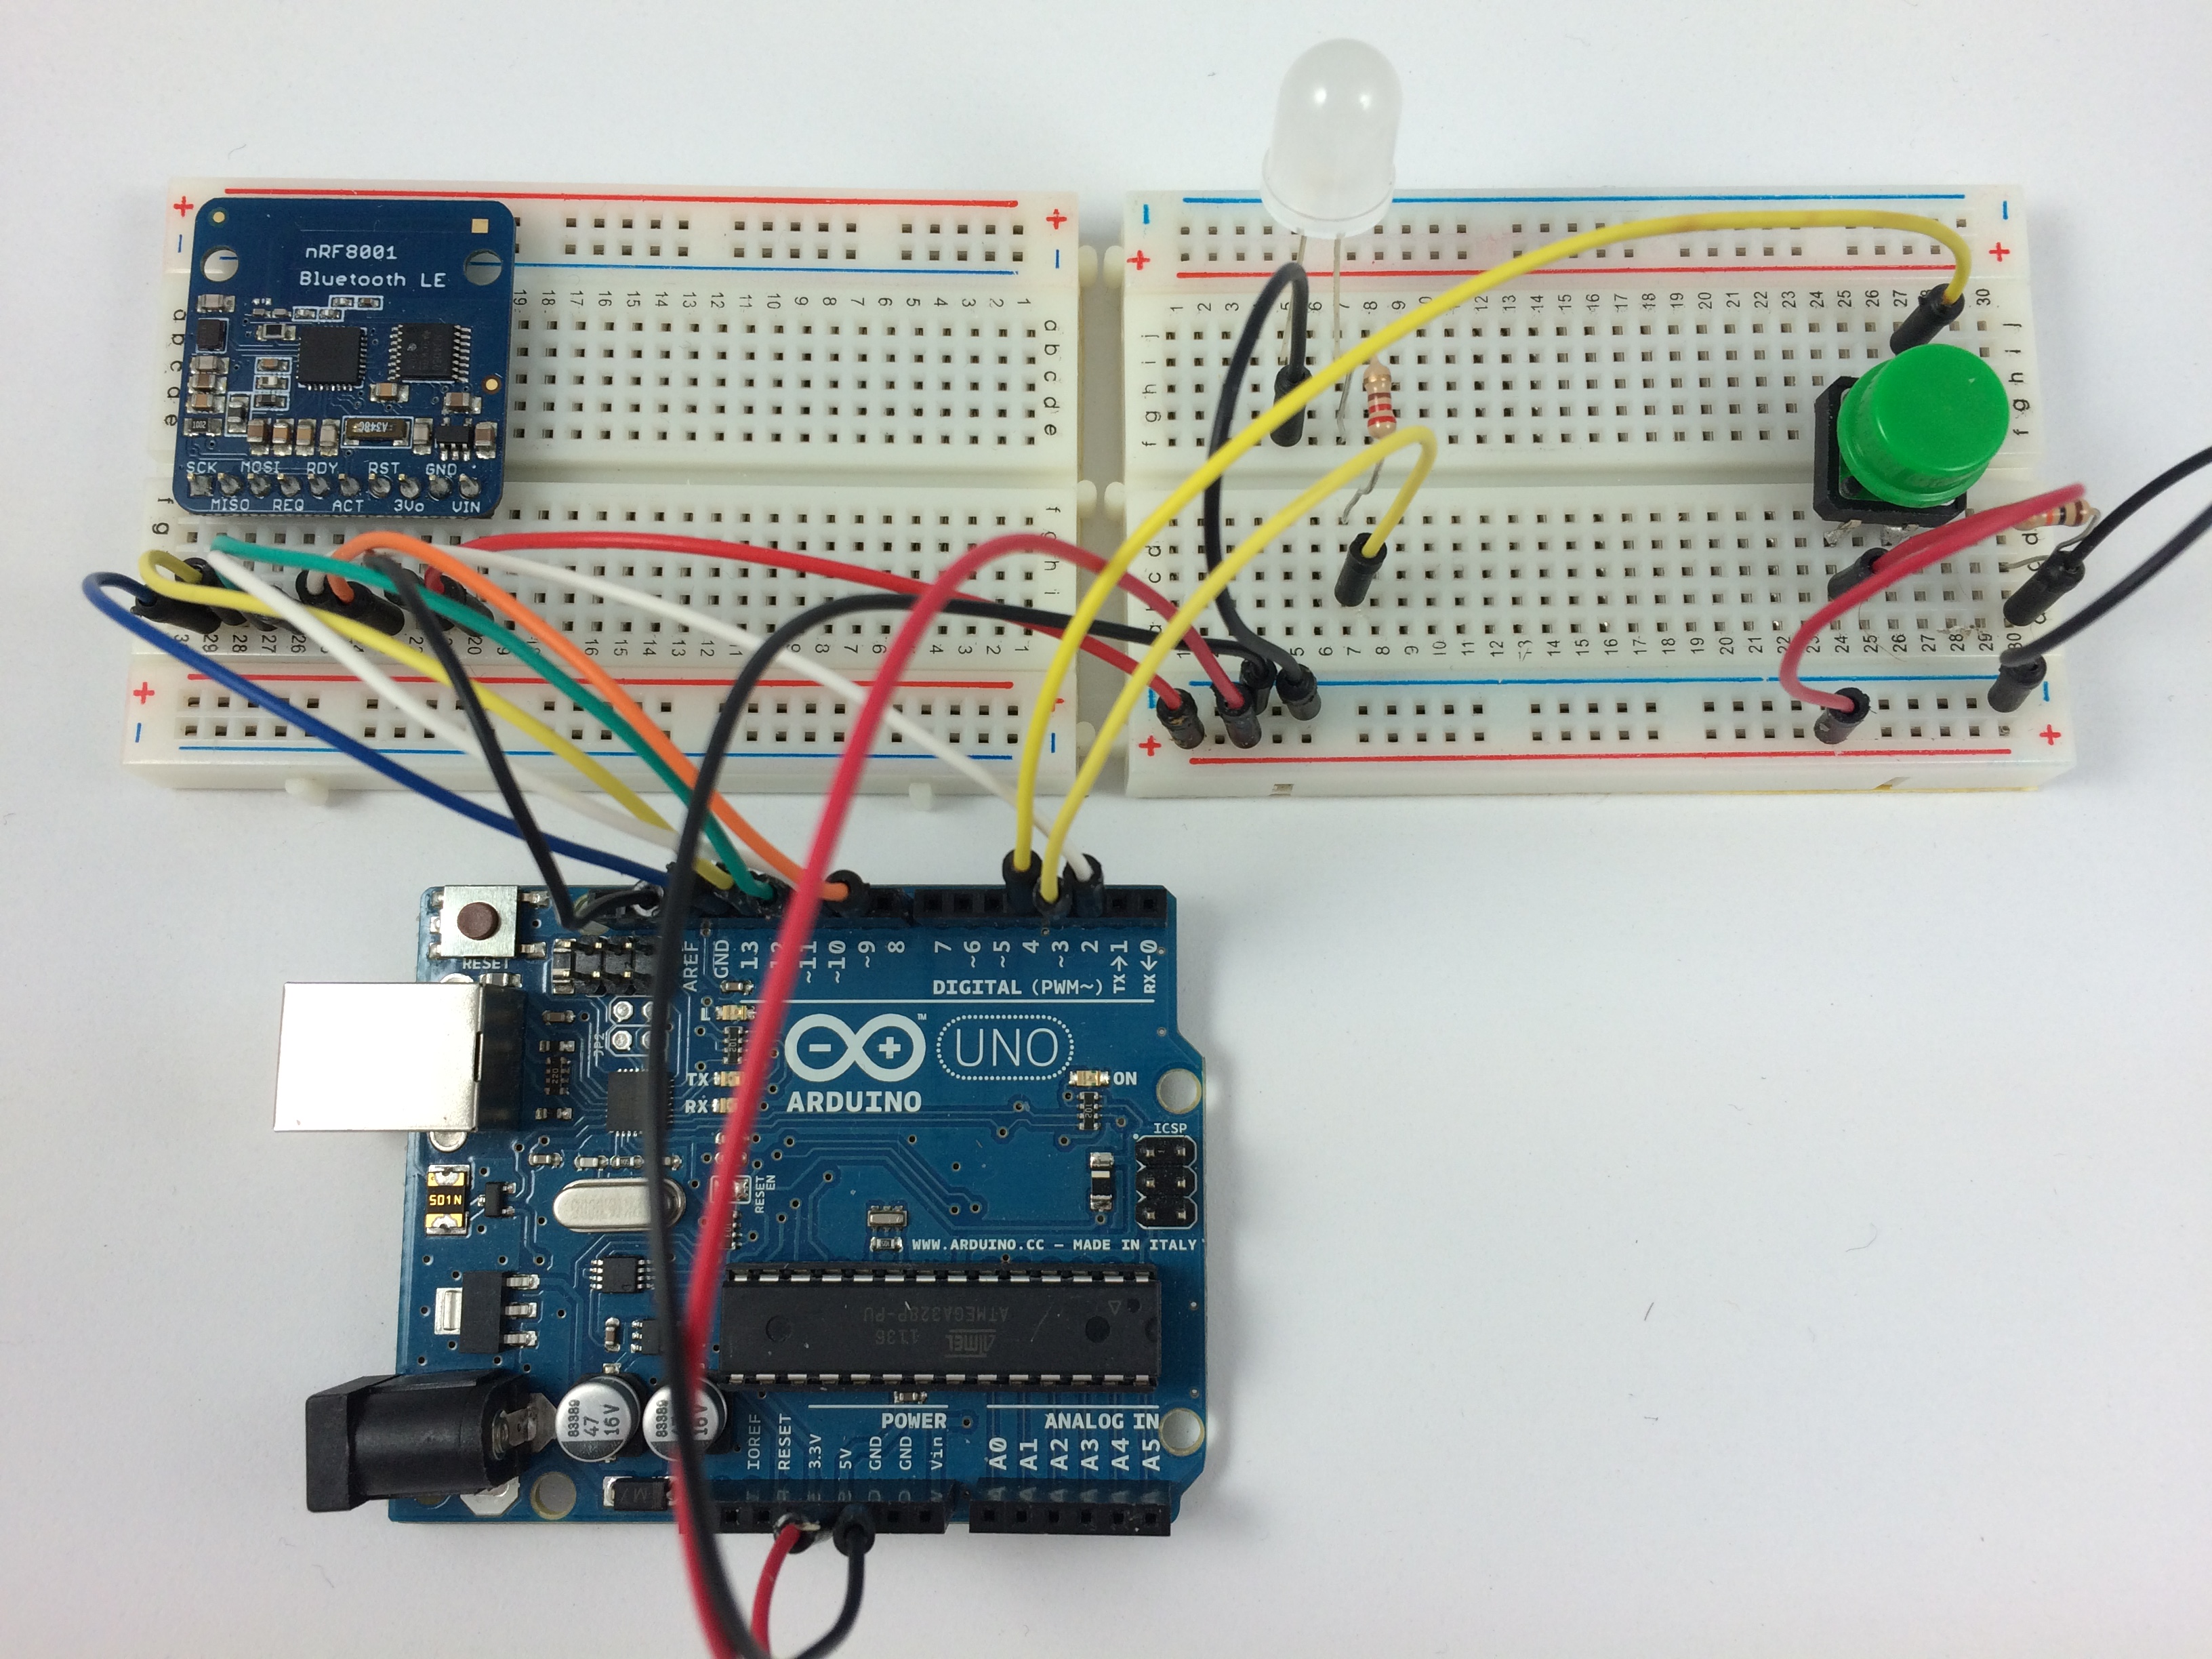 GitHub - MakeBluetooth/smart-light-switch: showing how to build a smart light